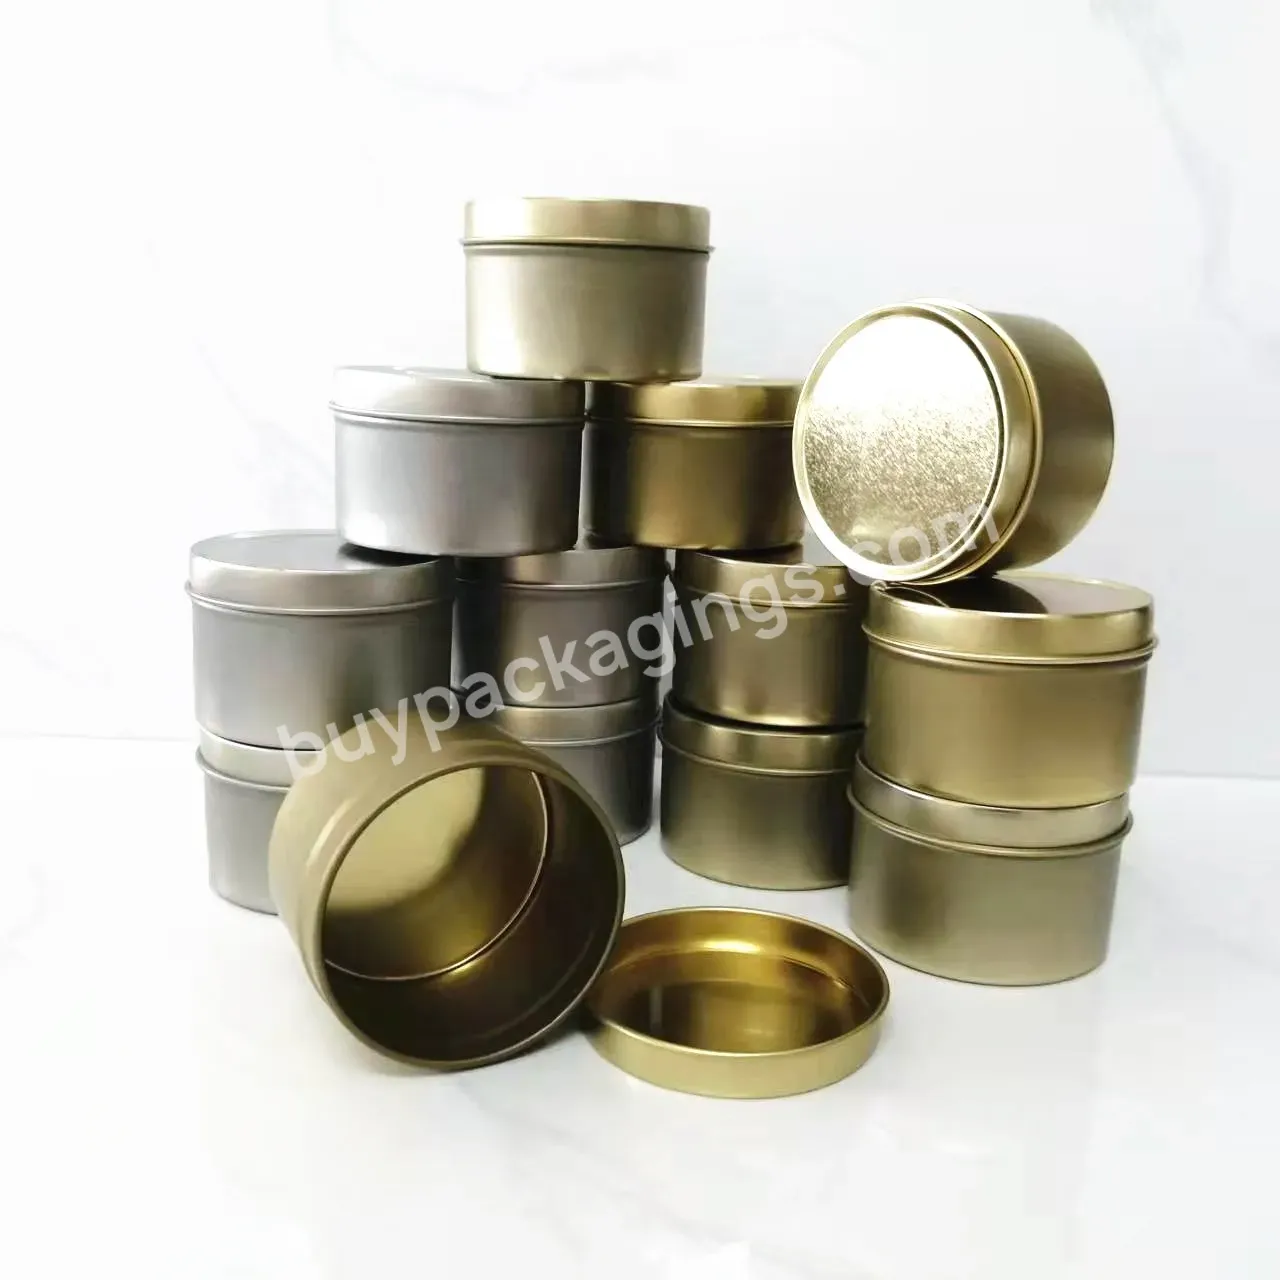 Factory Large Stock 2.5oz 3oz Candle Tins With Lids In Bulk Scented Soy Wax Candle Tin For Candle Making 60x40mm